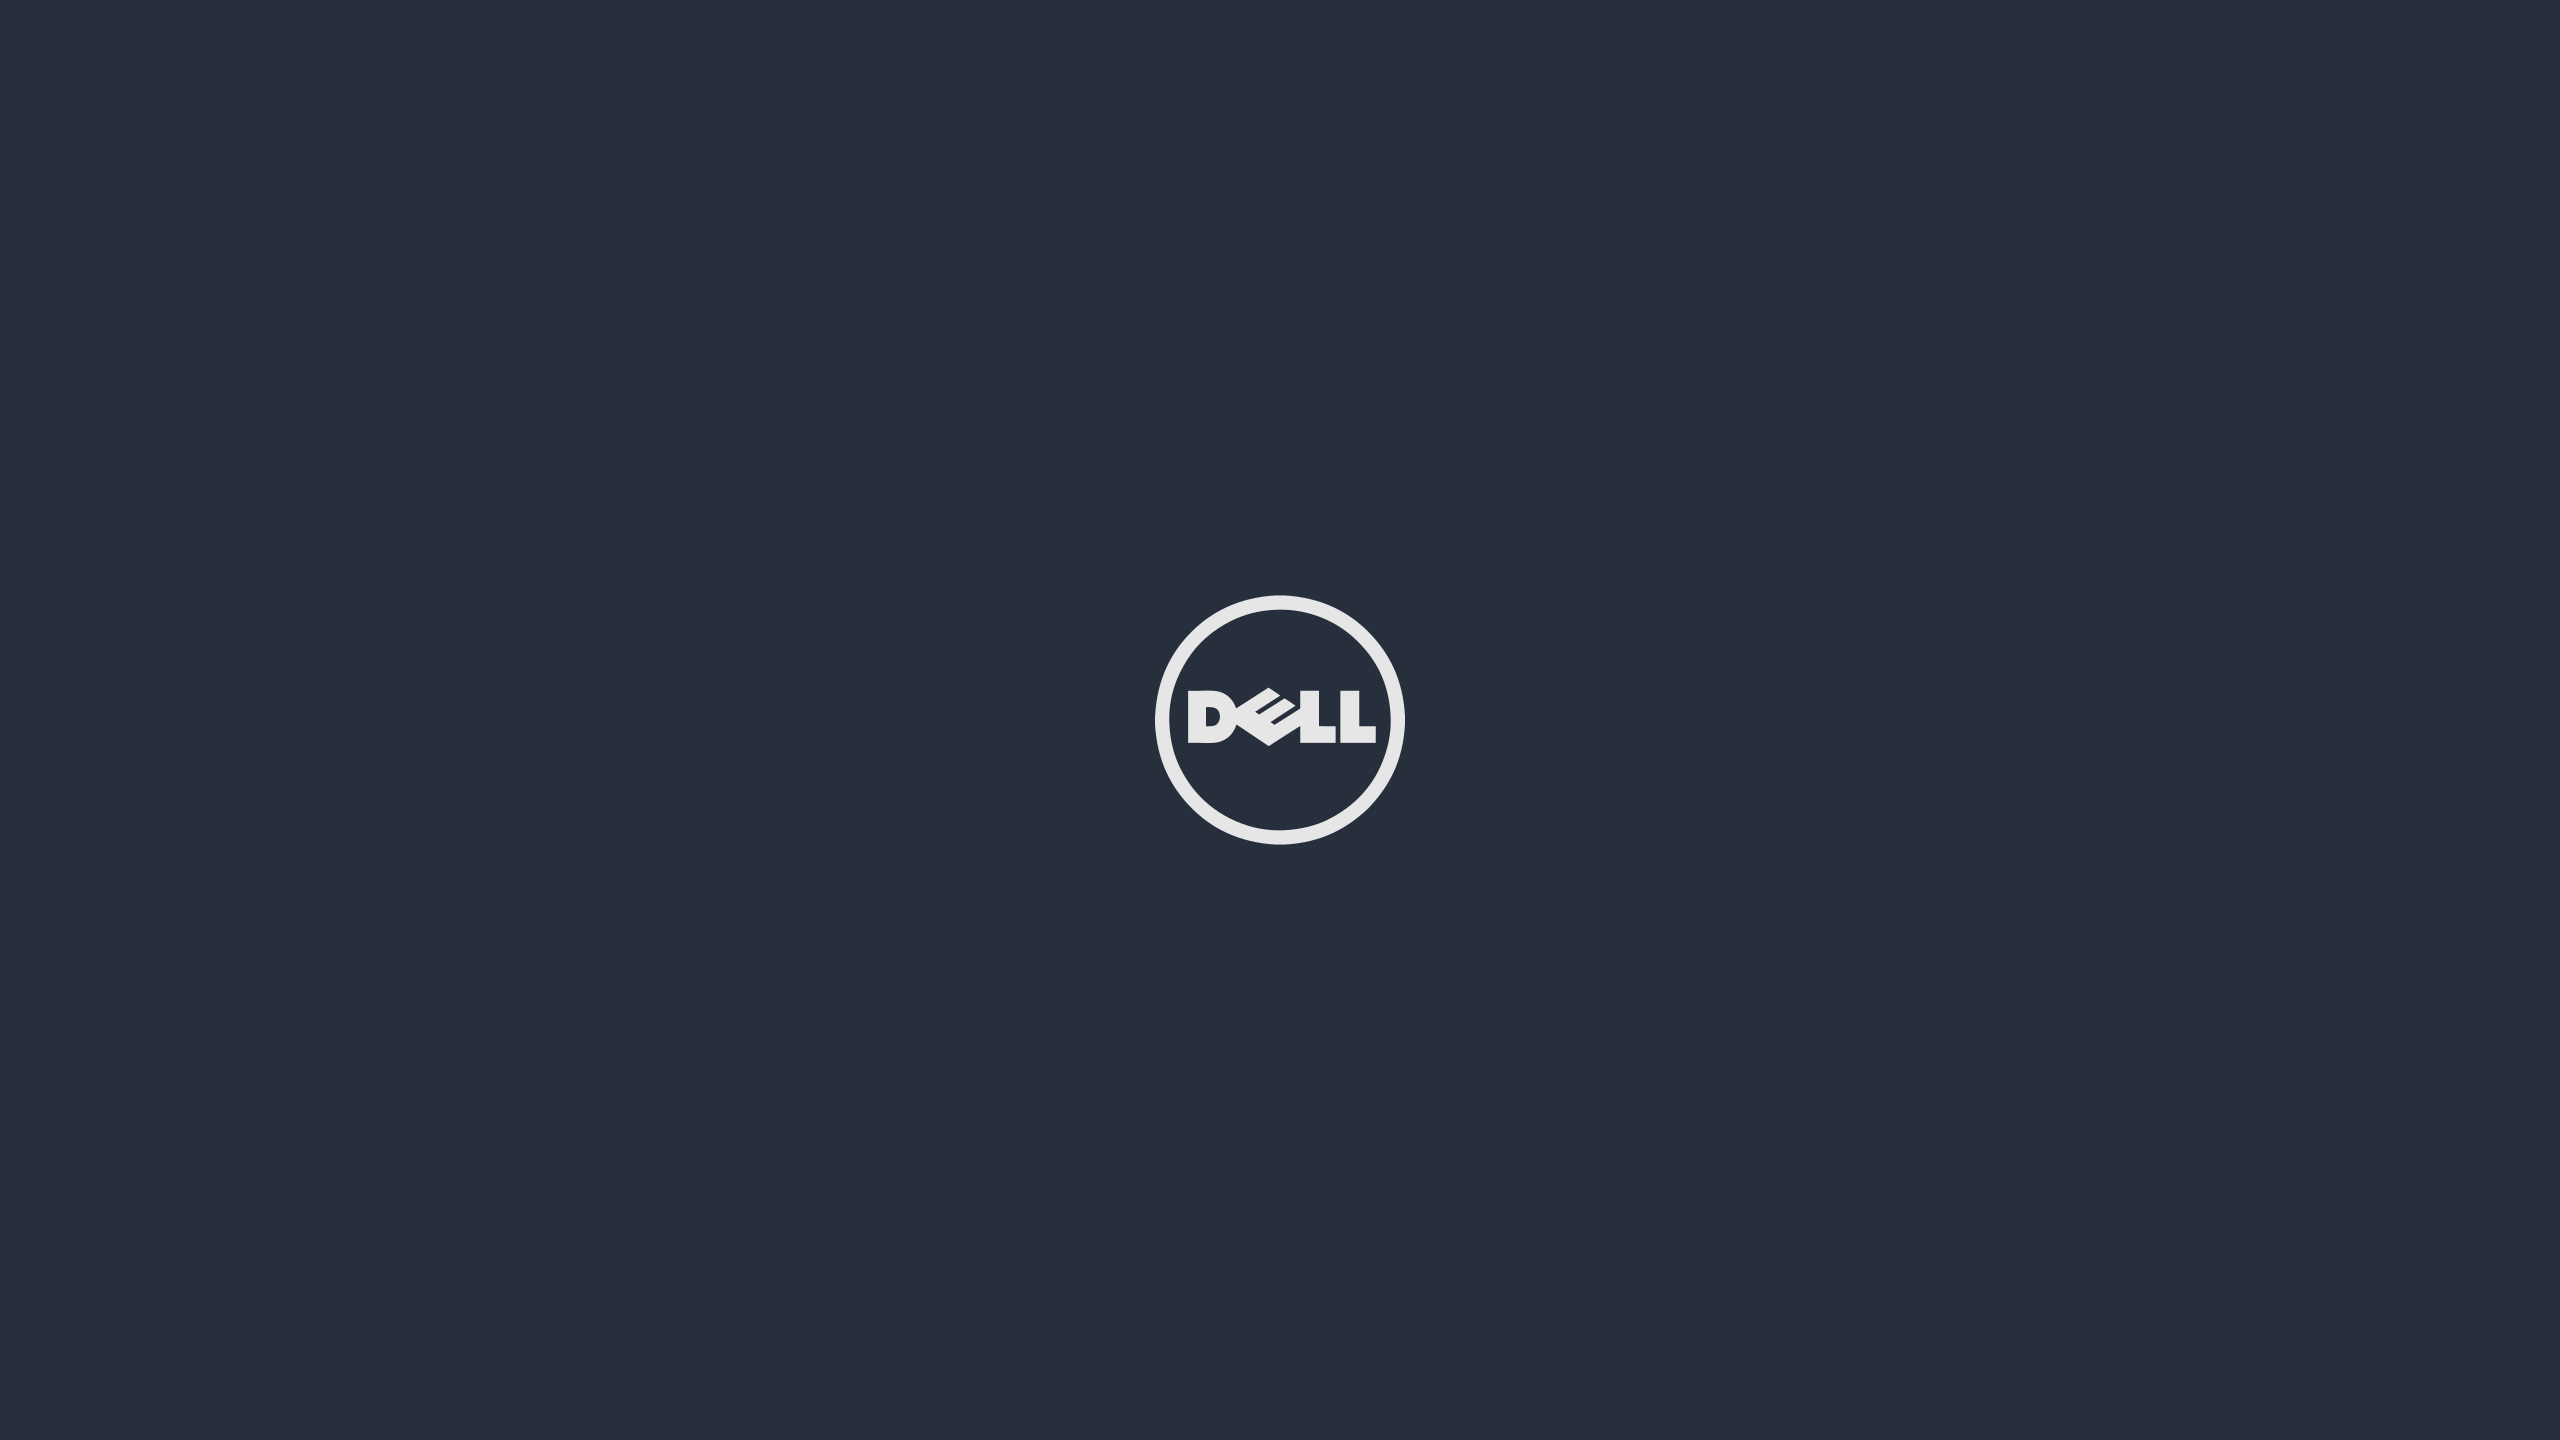 General 2560x1440 brand Dell minimalism simple background